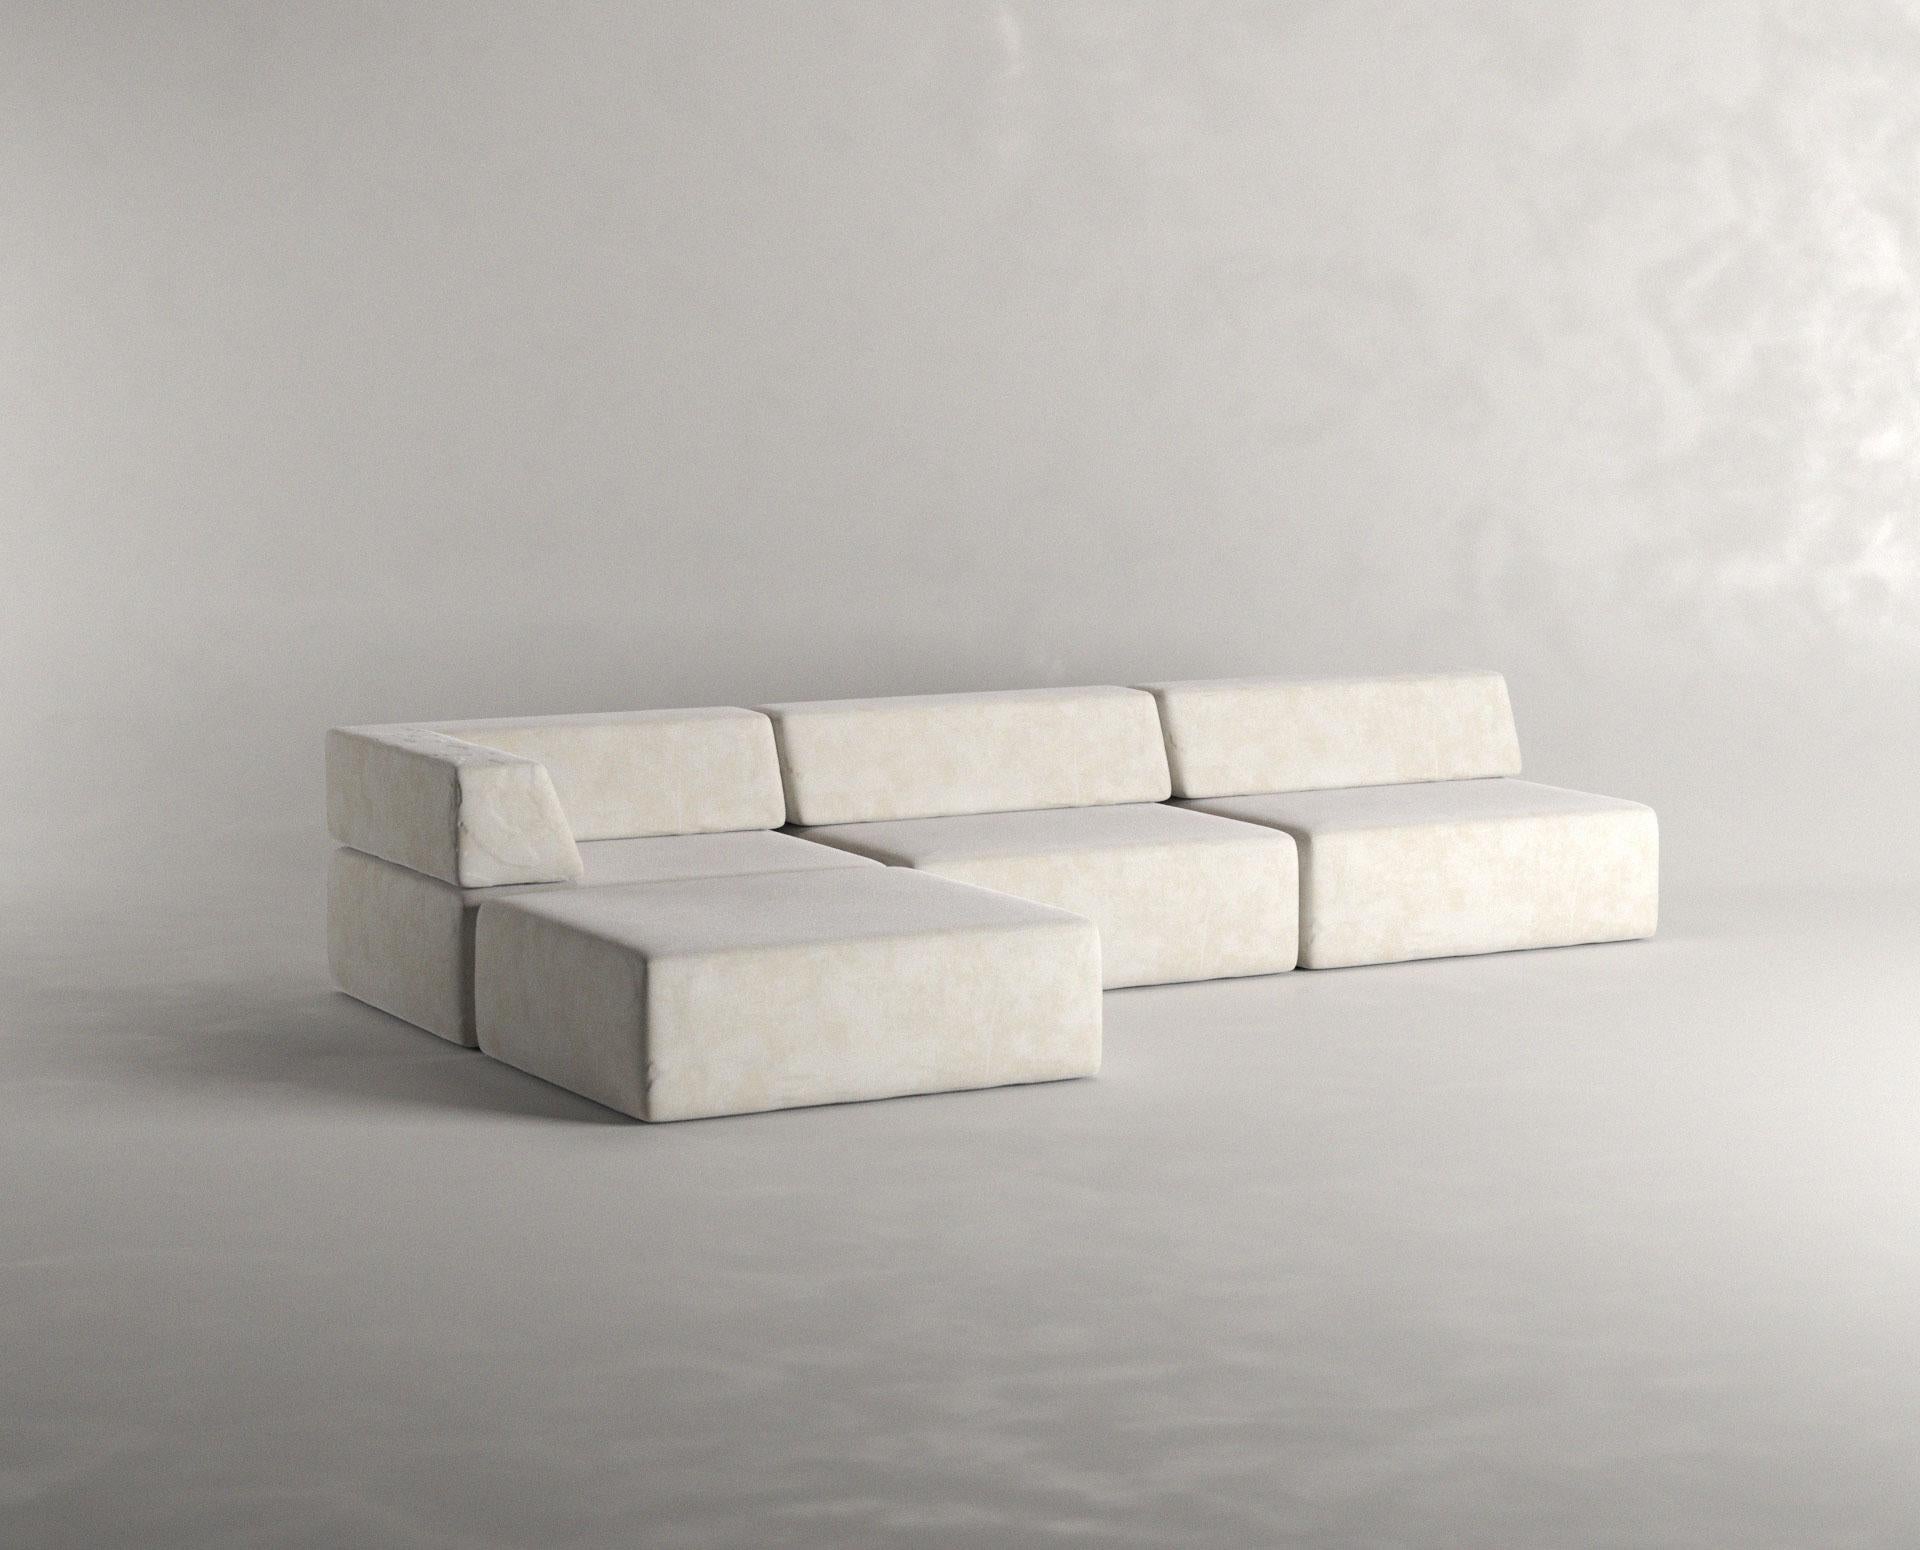 A dynamie piece inspired by its predecesor “Nube Sofa”; this extraction simplifies its geometry even further and plays with the dynamism of modules that allow the user an intimate interaction with the piece.